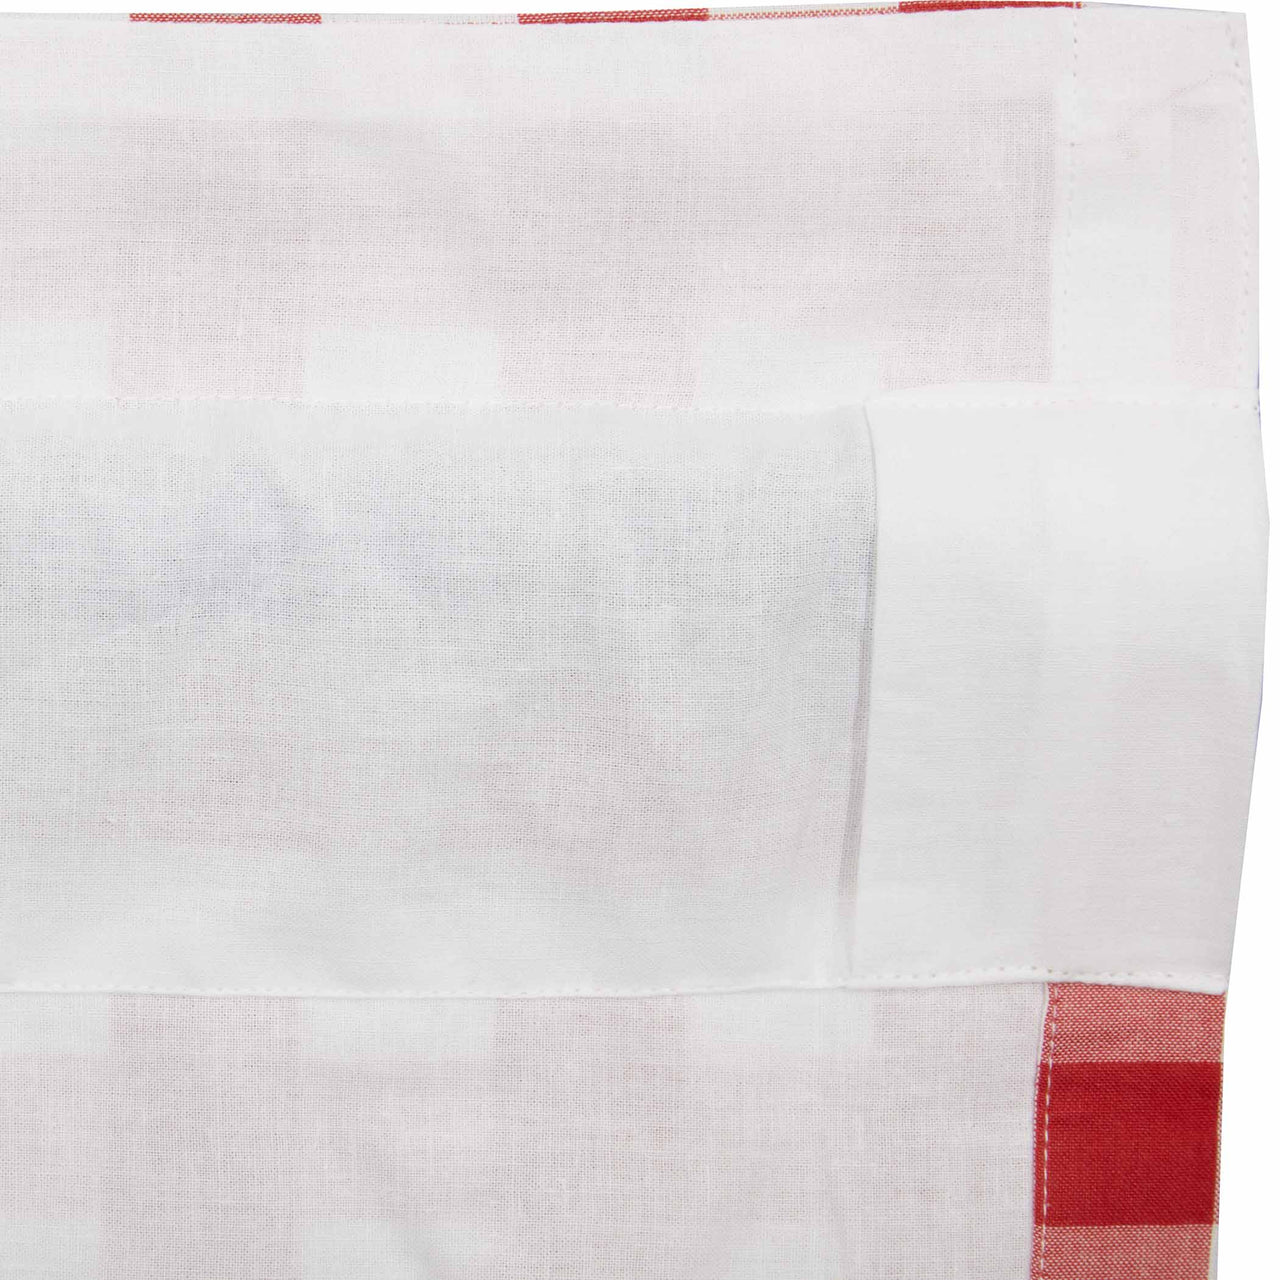 Annie Buffalo Red Check Ruffled Panel Curtain 96"x50" VHC Brands